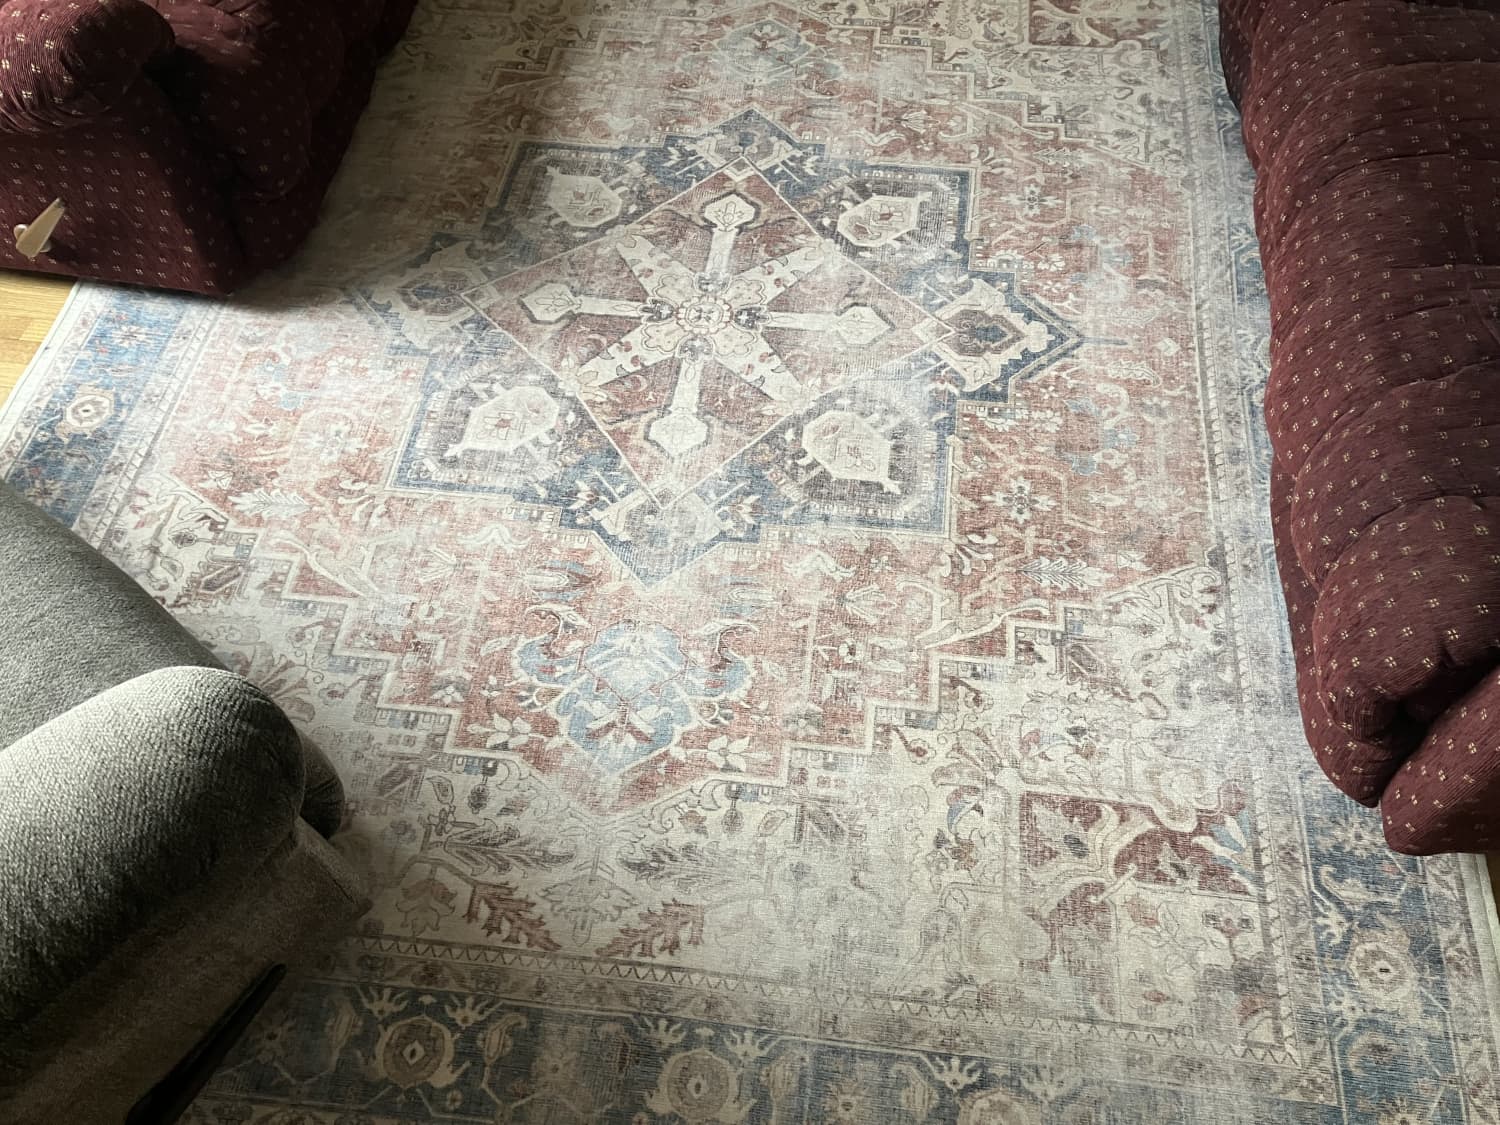 haleysimao: Ruggable Review // Washable Rug Review #4